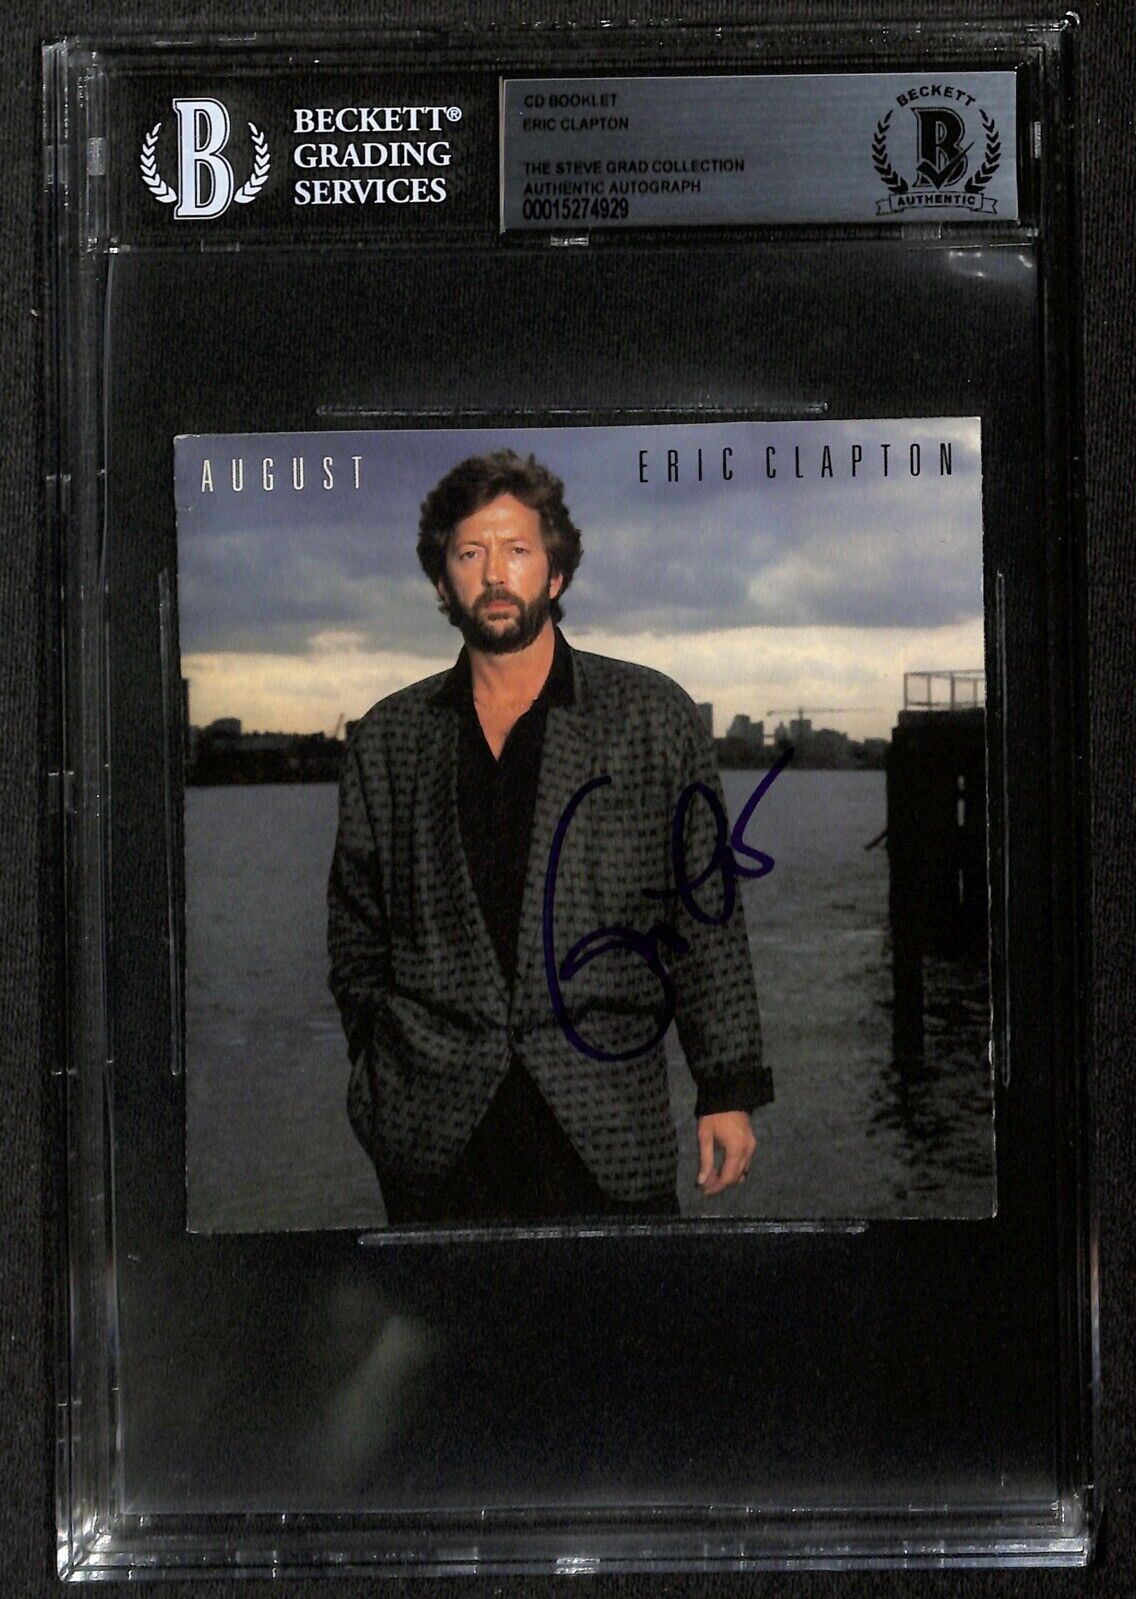 Eric Clapton of Cream Guitar Legend August In-Person Signed CD Jacket BECKETT